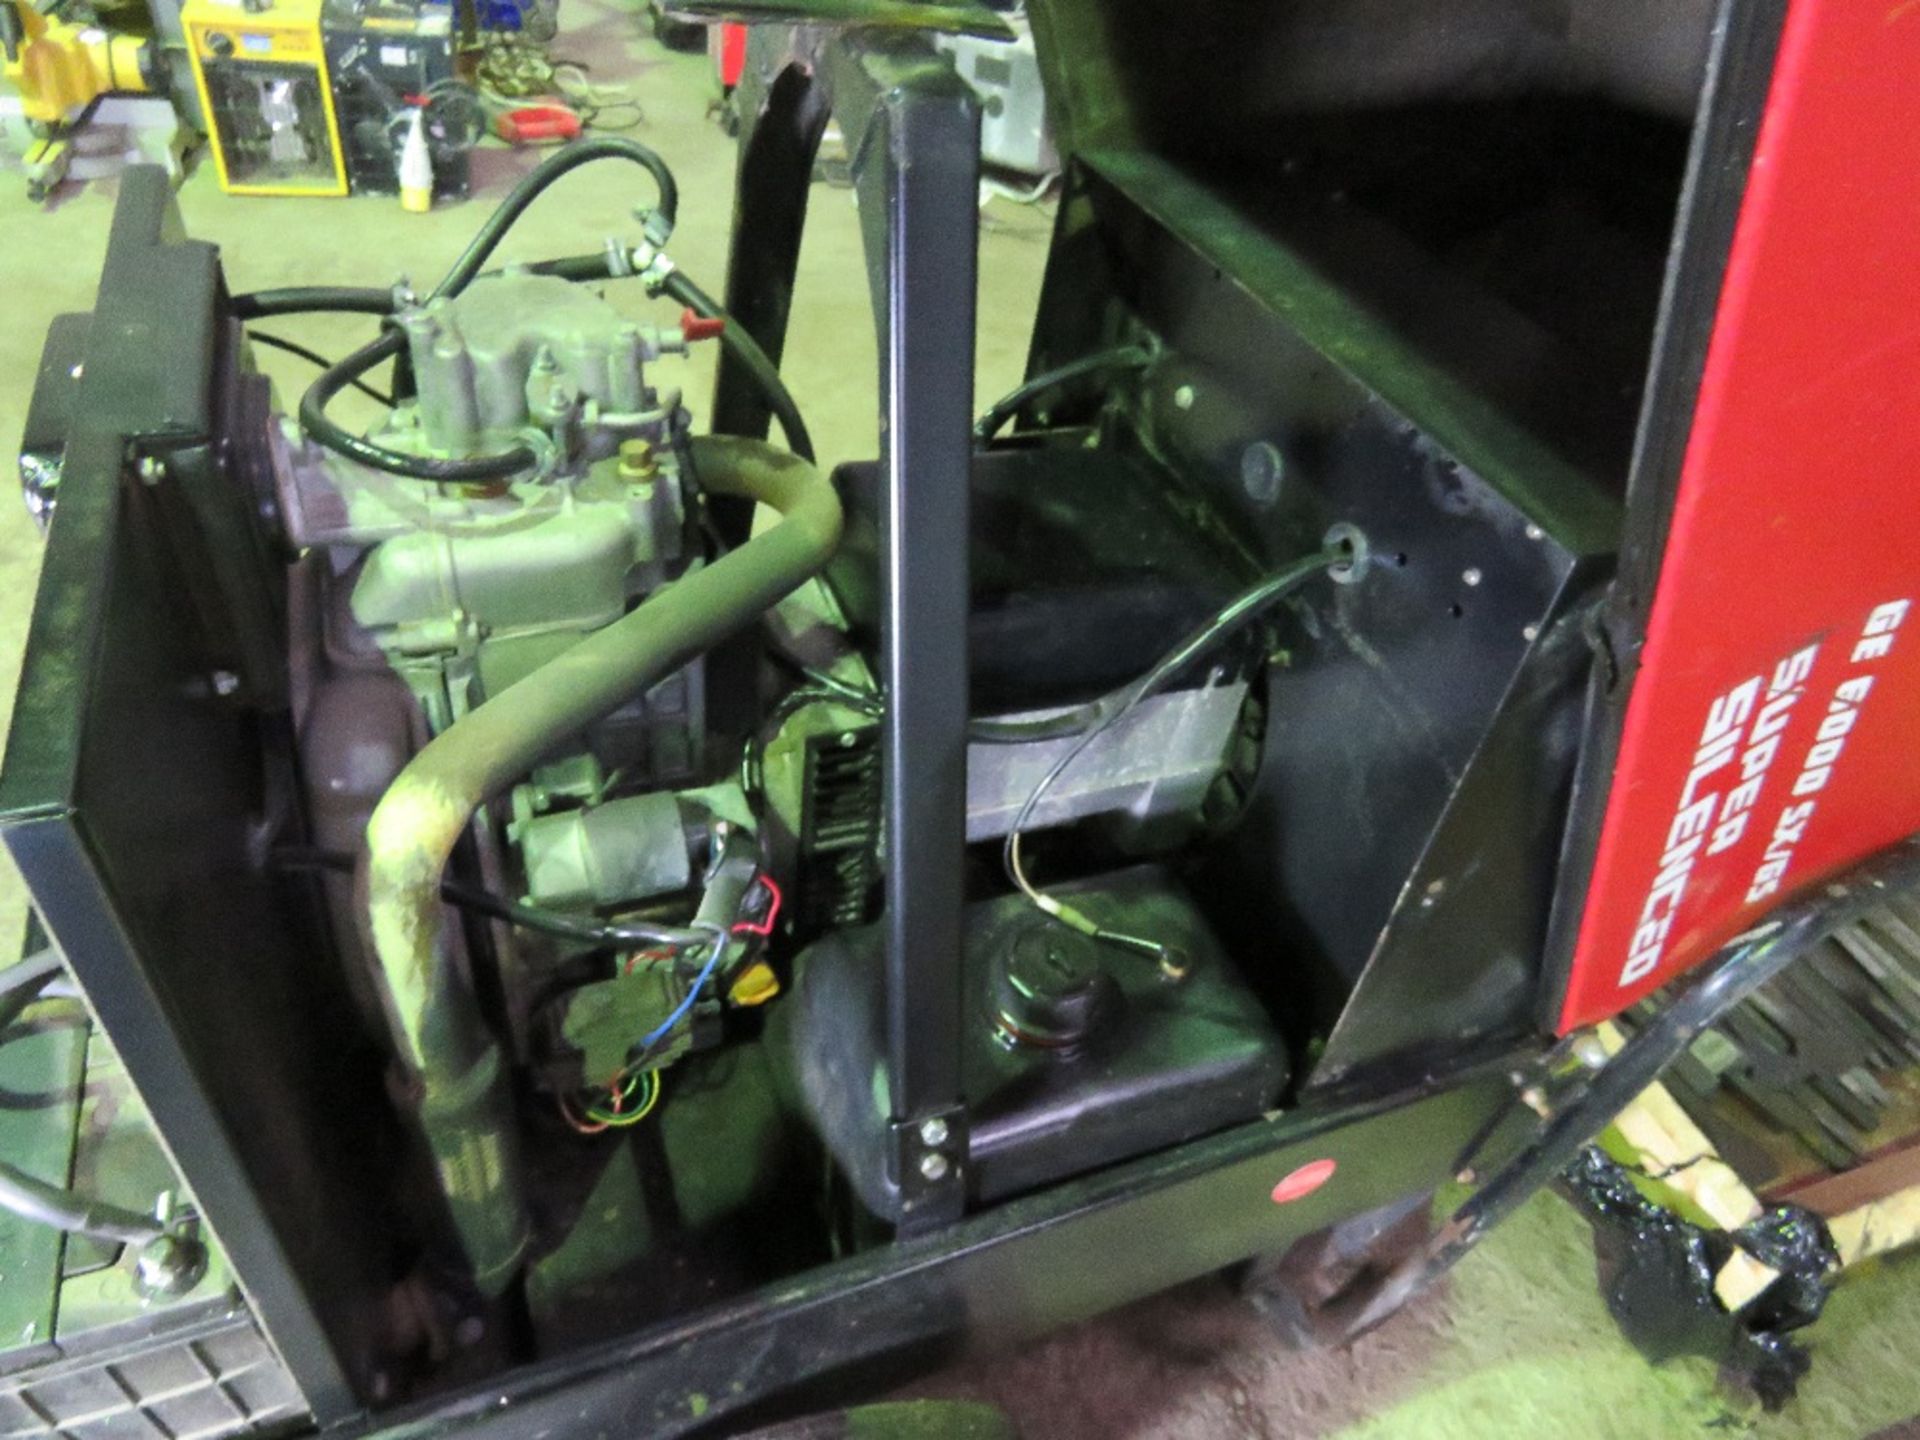 MOSA GE6000SX/GS BARROW GENERATOR. YEAR 2014 BUILD. WHEN TESTED WAS SEEN TO RUN BUT WAS NOT SHOWING - Image 6 of 6